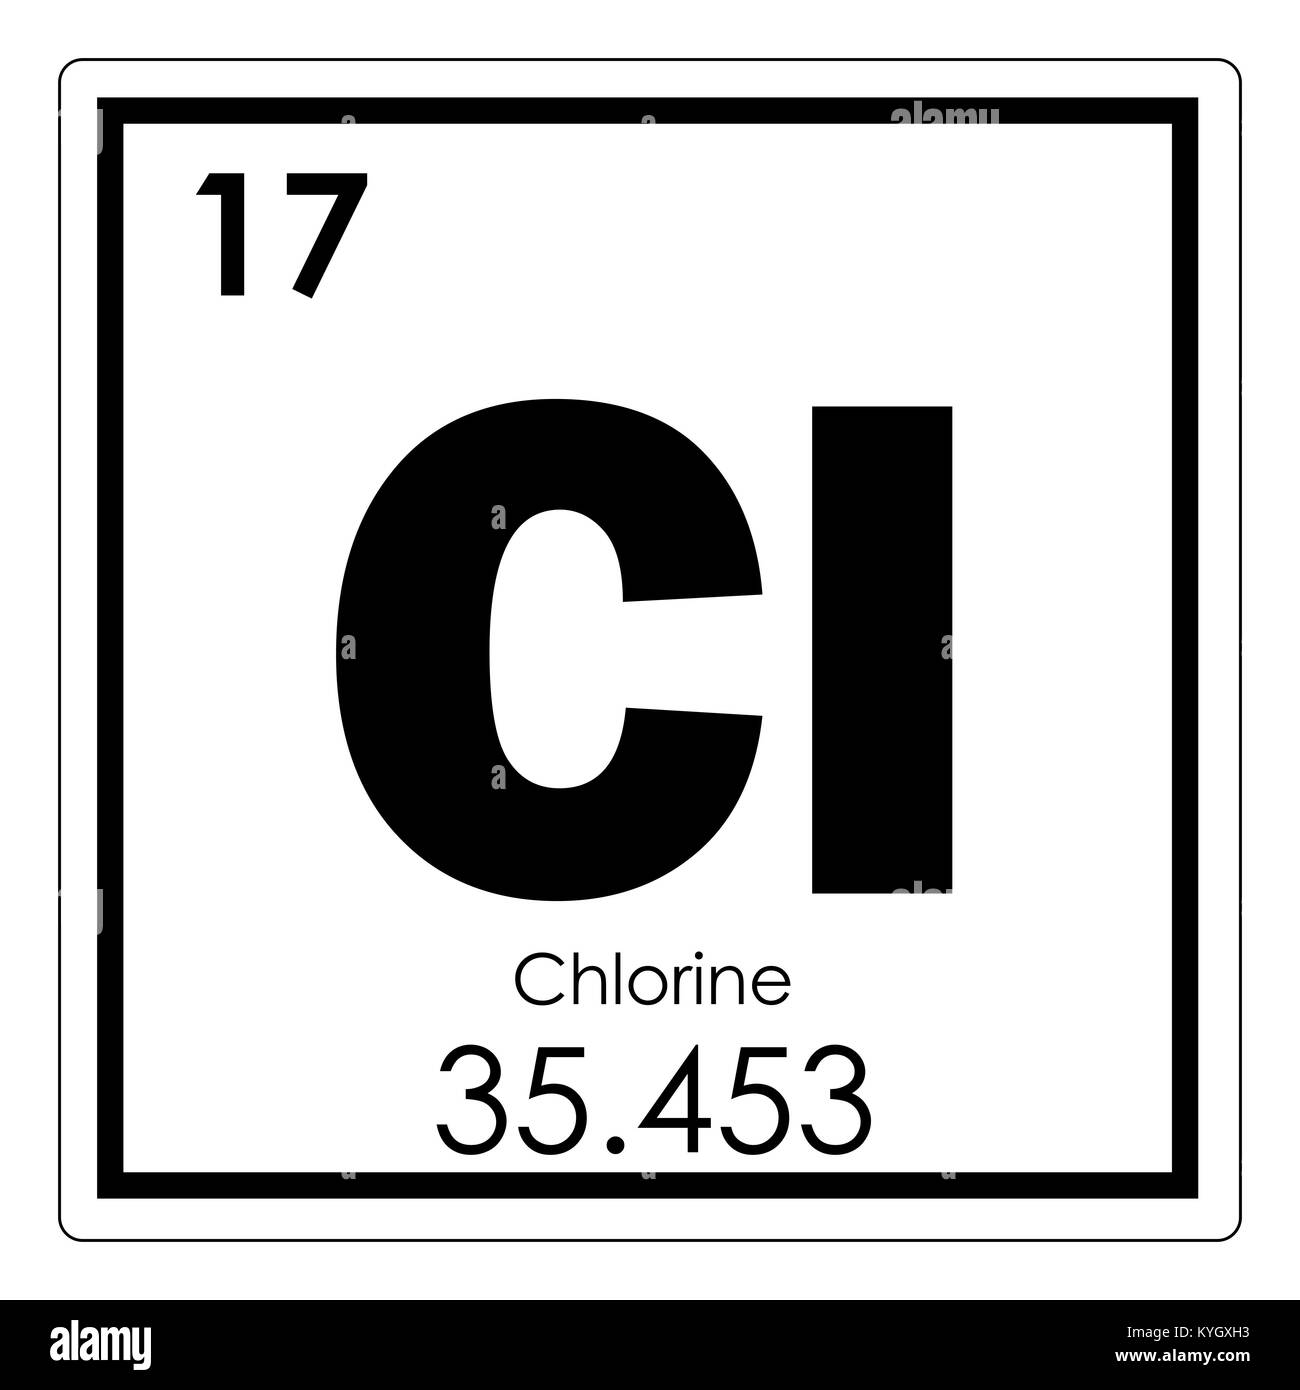 Chlorine chemical element periodic table science symbol Stock Photo - Alamy